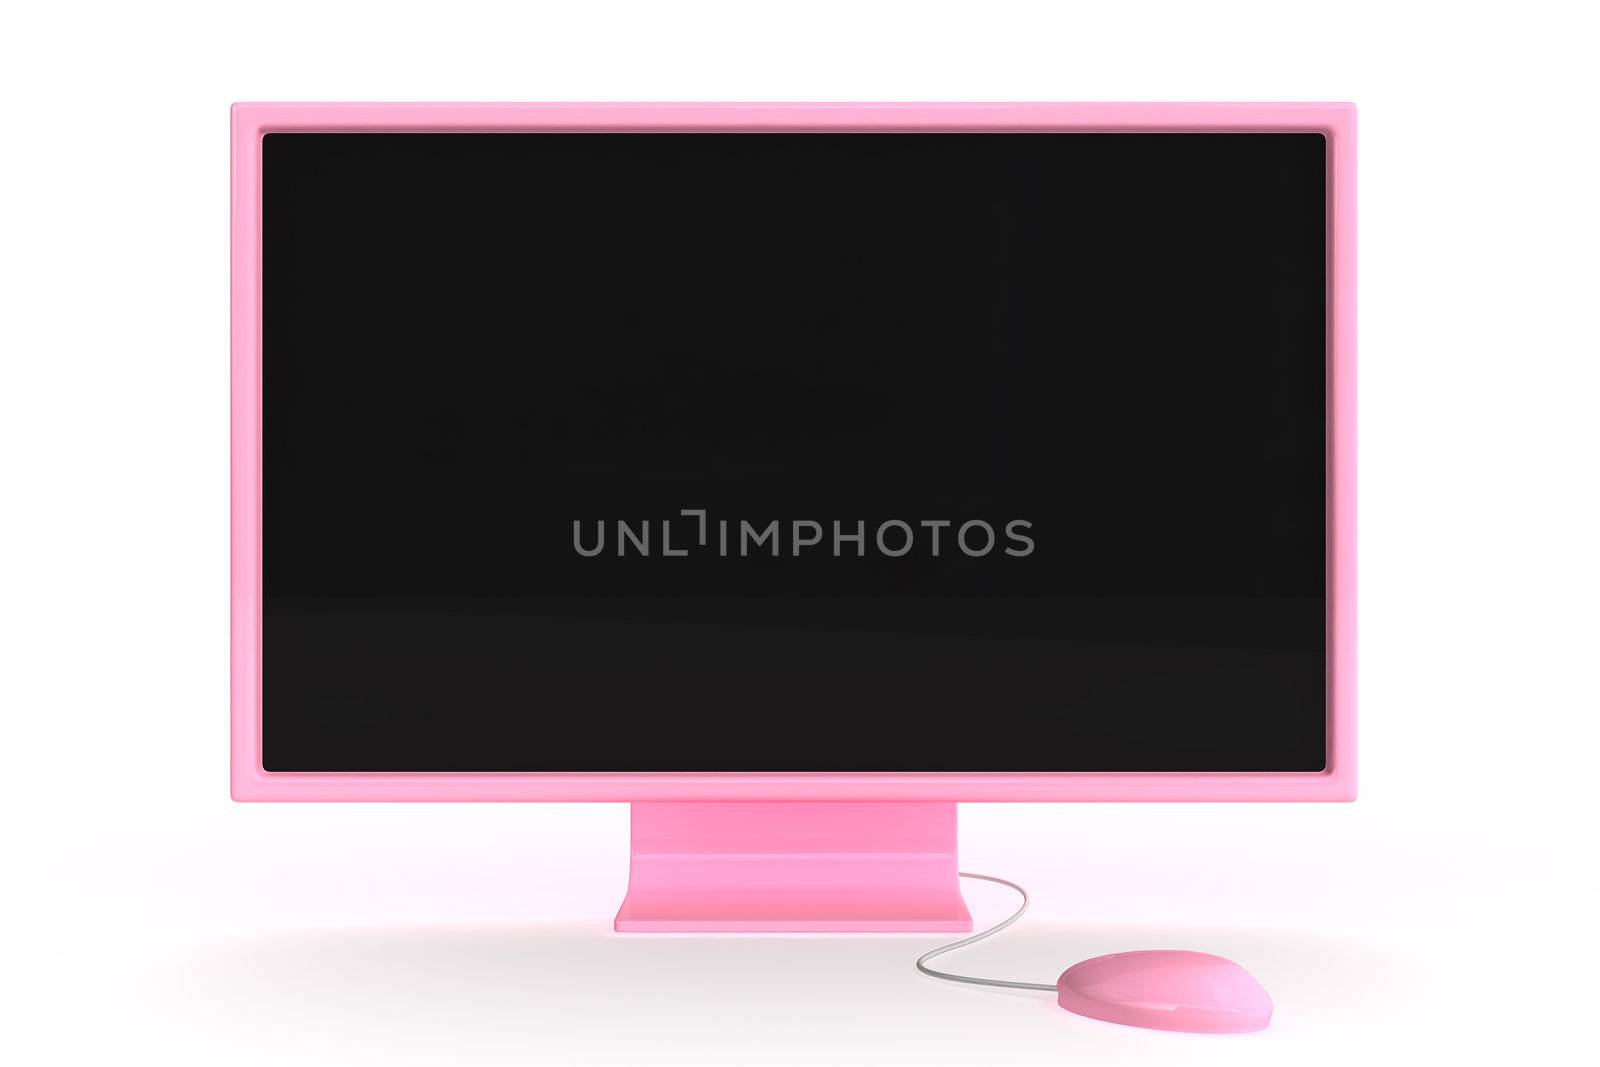 Pink computer monitor and mouse